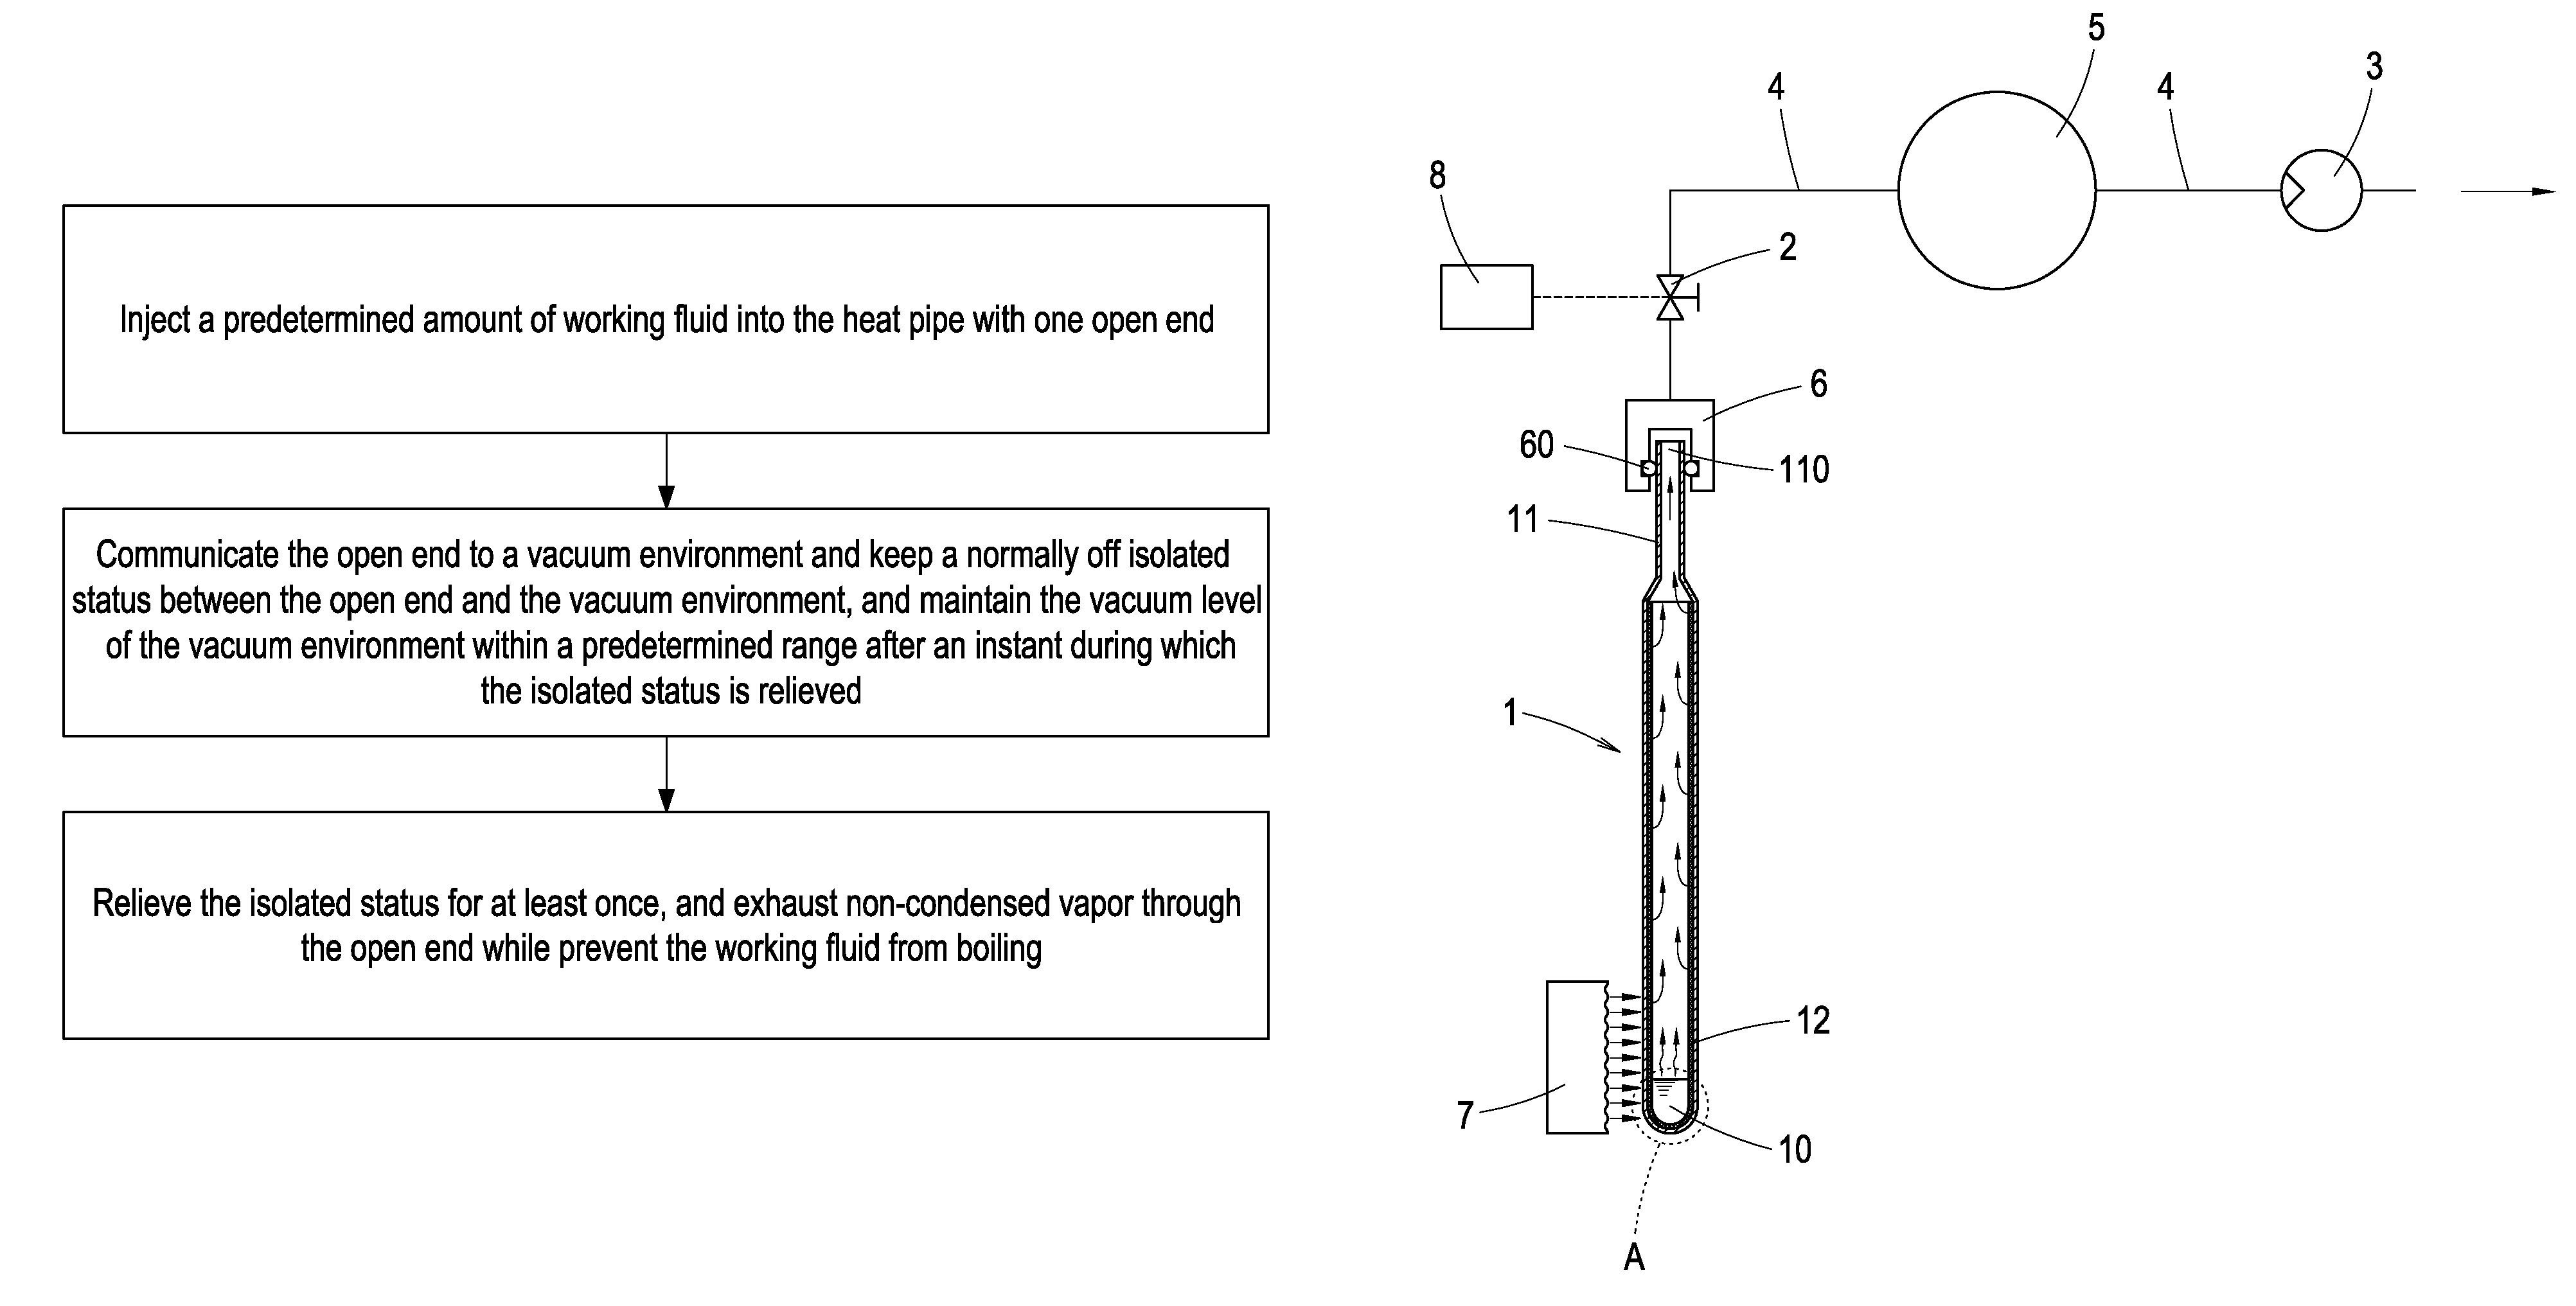 Method for removing vapor within heat pipe